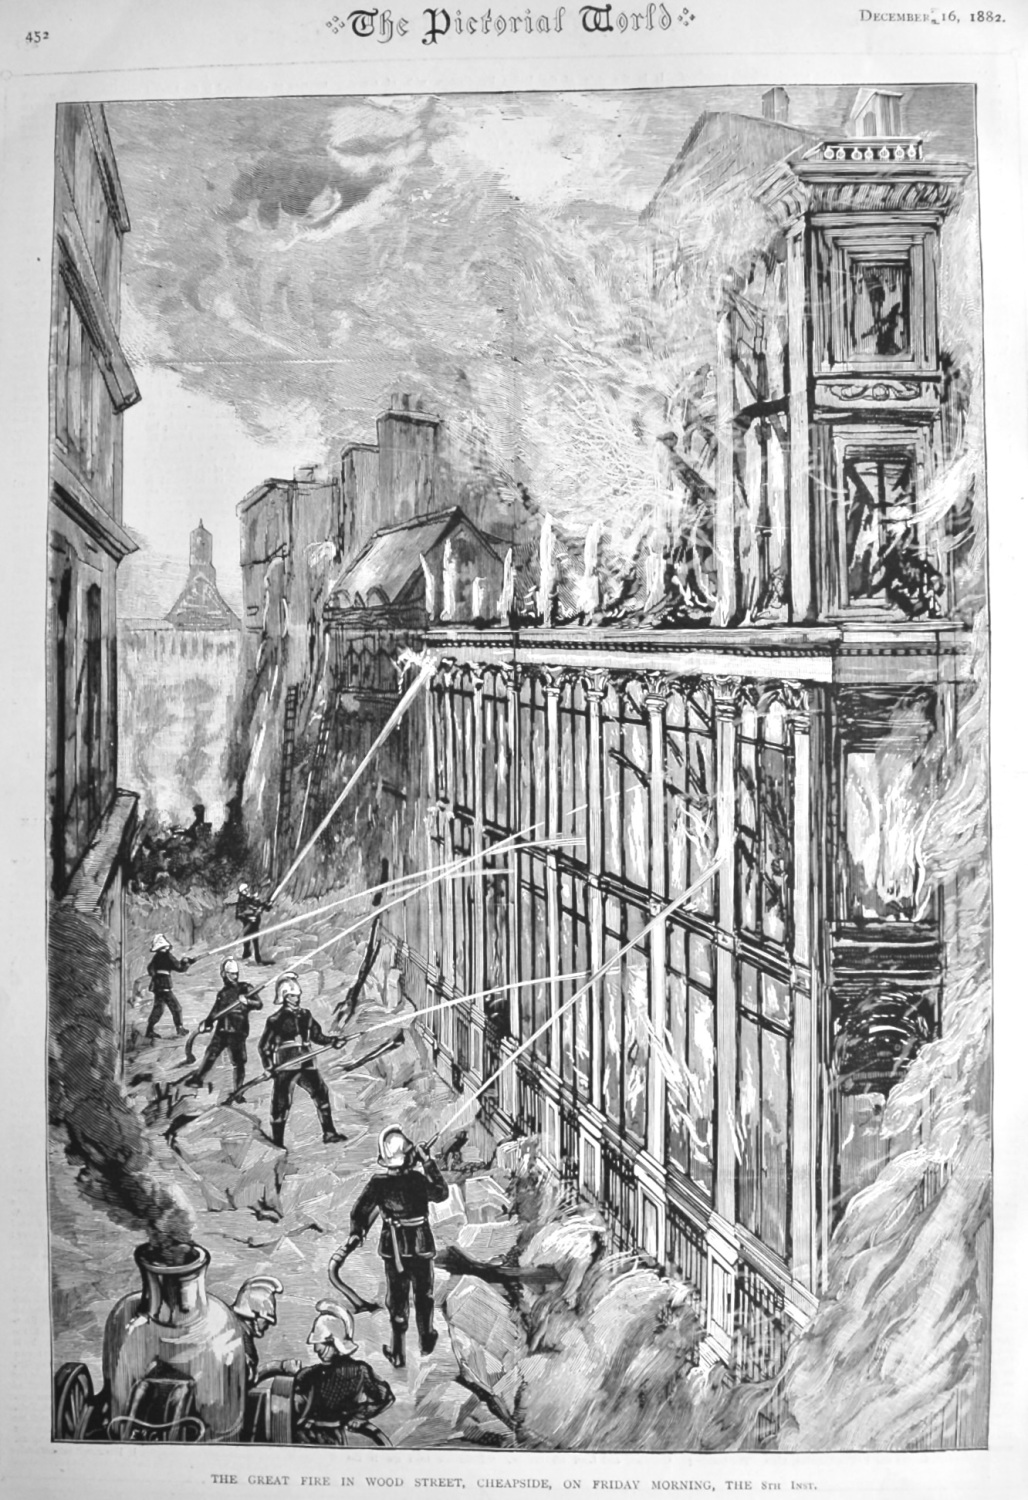 The Great Fire in Wood Street, Cheapside, on Friday Morning, the 8th Inst. 